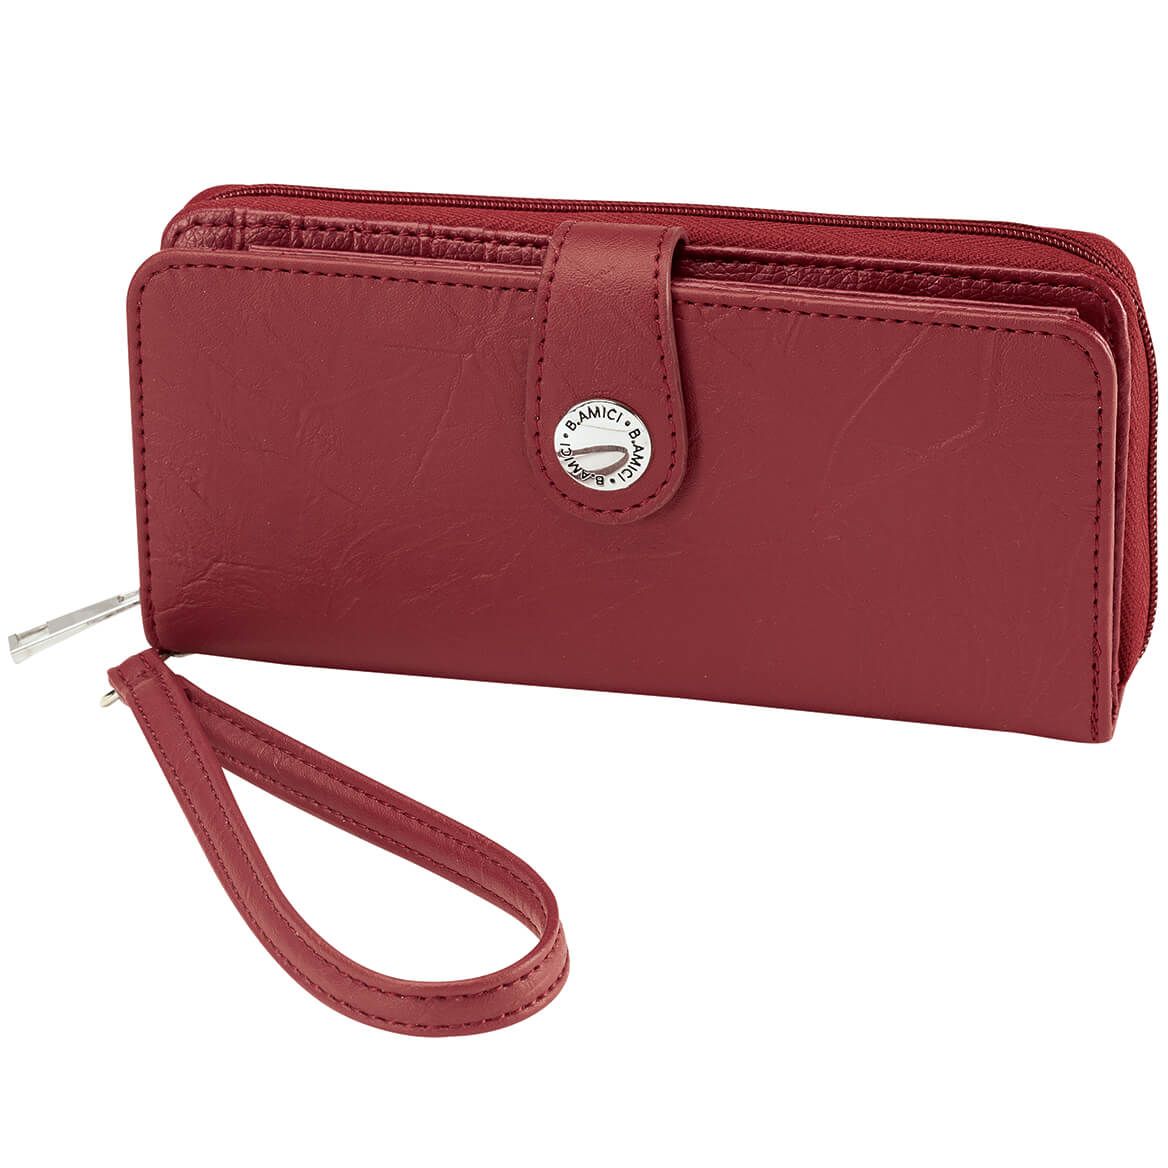 B. Amici™ Nancy RFID Leather Wallet with Wristlet + '-' + 372510